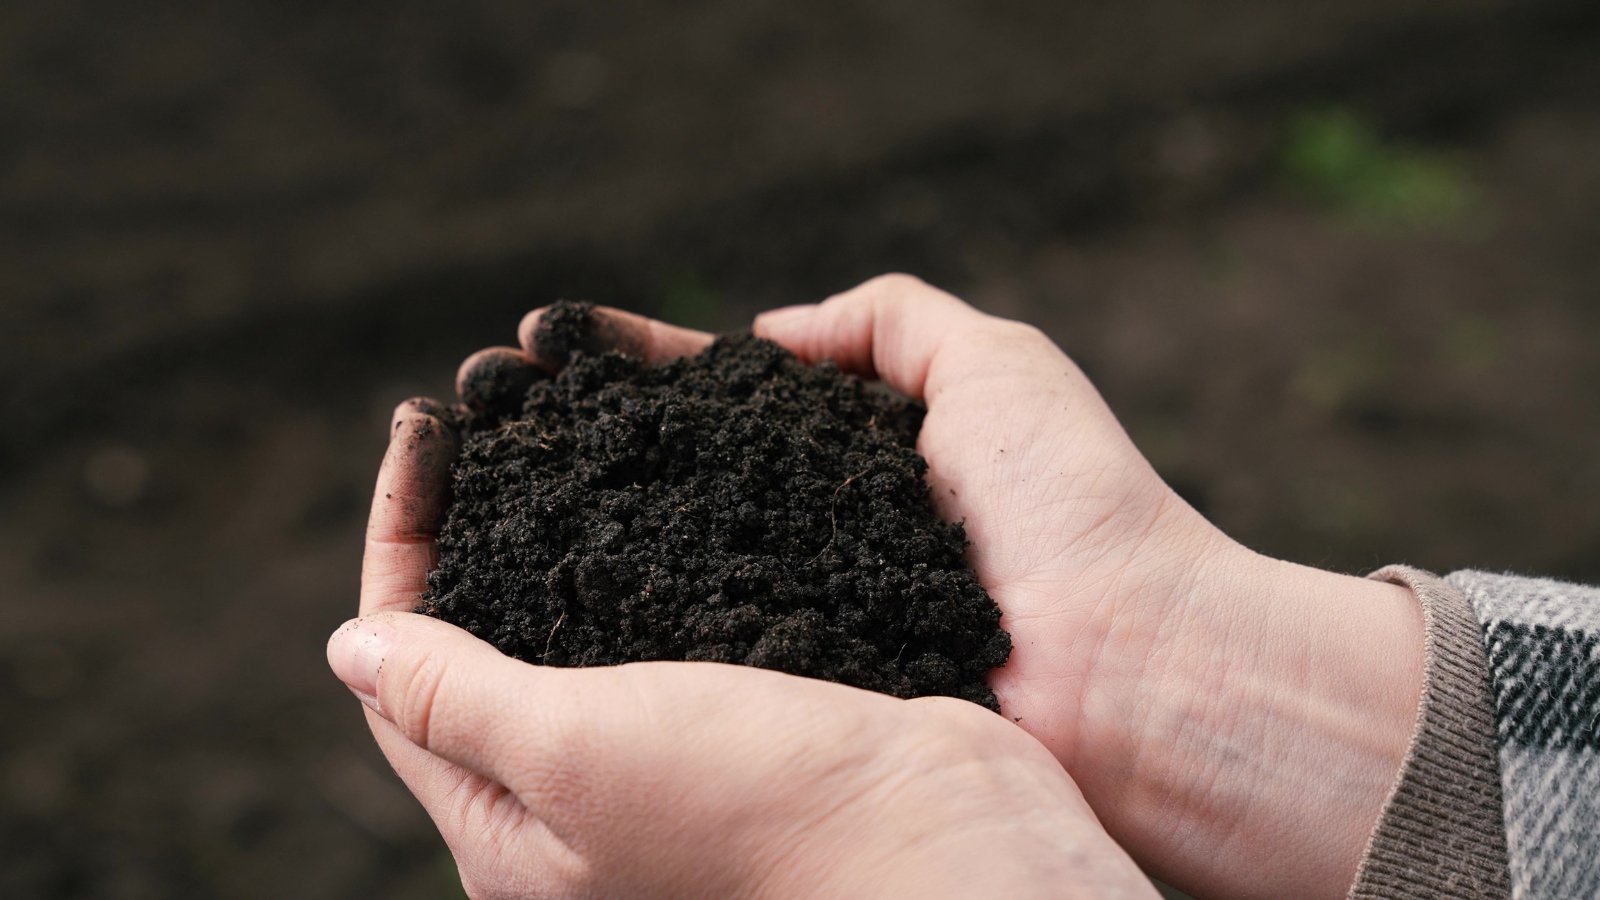 Close-up of a gardener's hands holding a handful of fresh, loose soil in a rich black color against a blurred background.